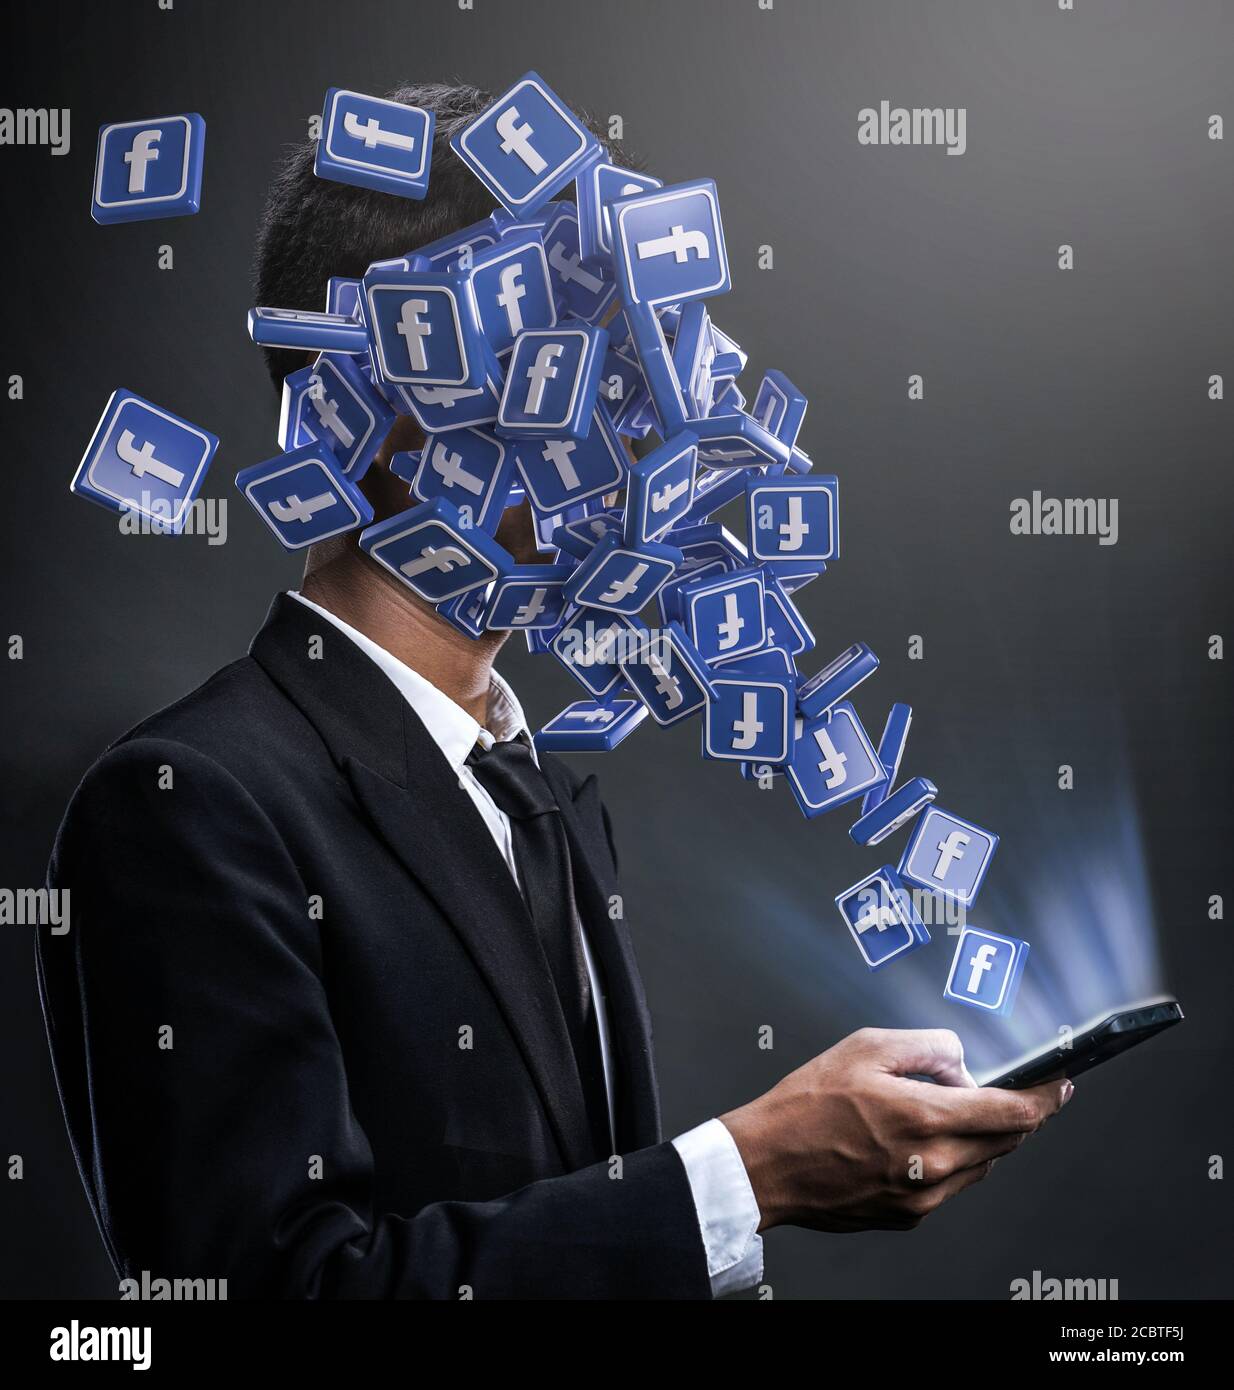 Facebook-Suchtkonzept. Businessman Open Phone Facebook Icons Pop up to the face. Stockfoto